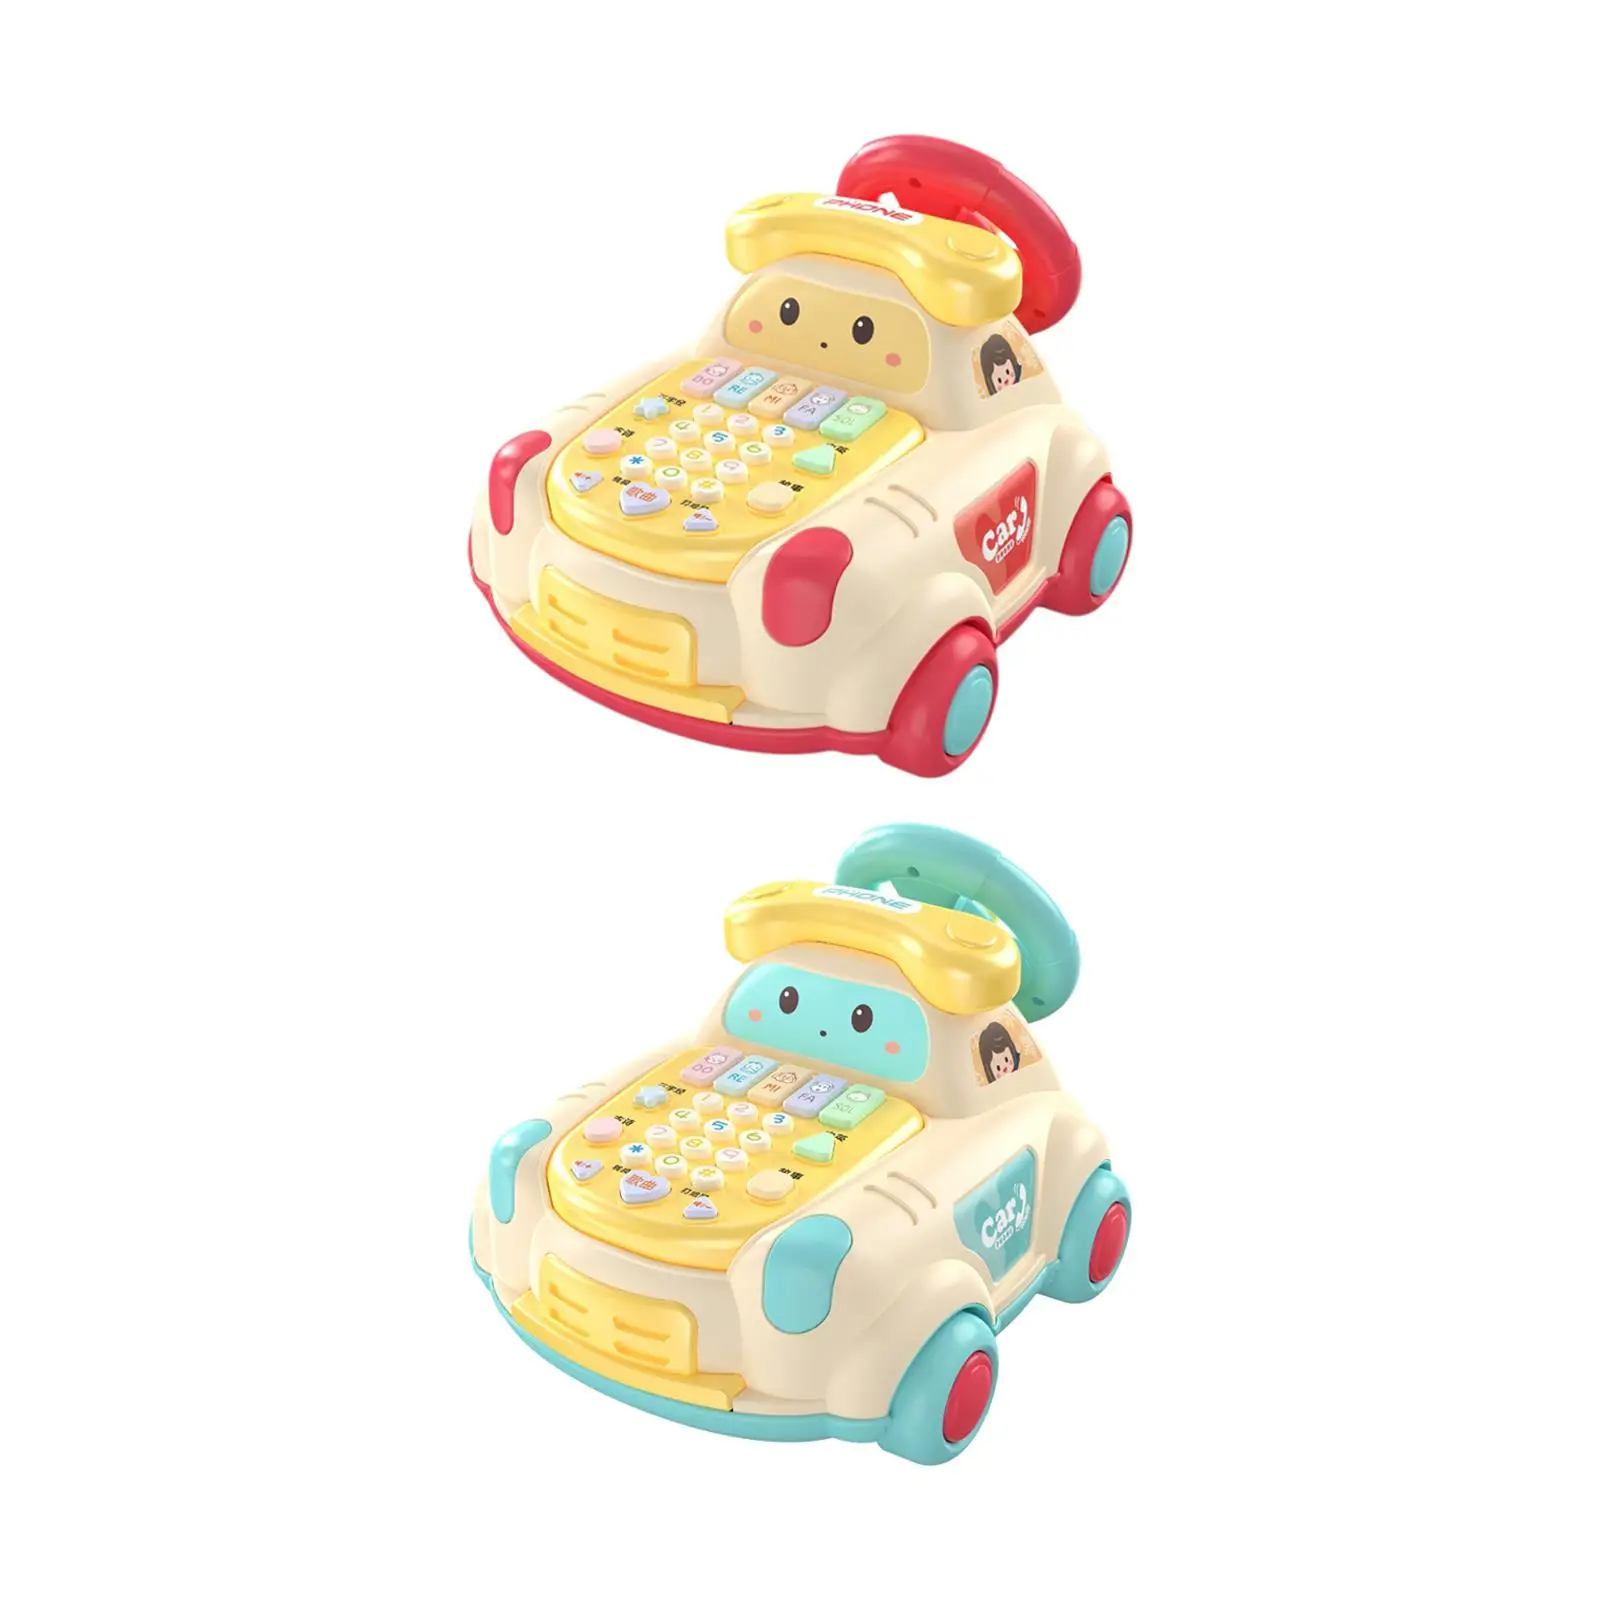 Baby Musical Toys Car Multifunctional Fine Motor Skills Pull Toys Music Light Phone Toy for Game Development Learning Education